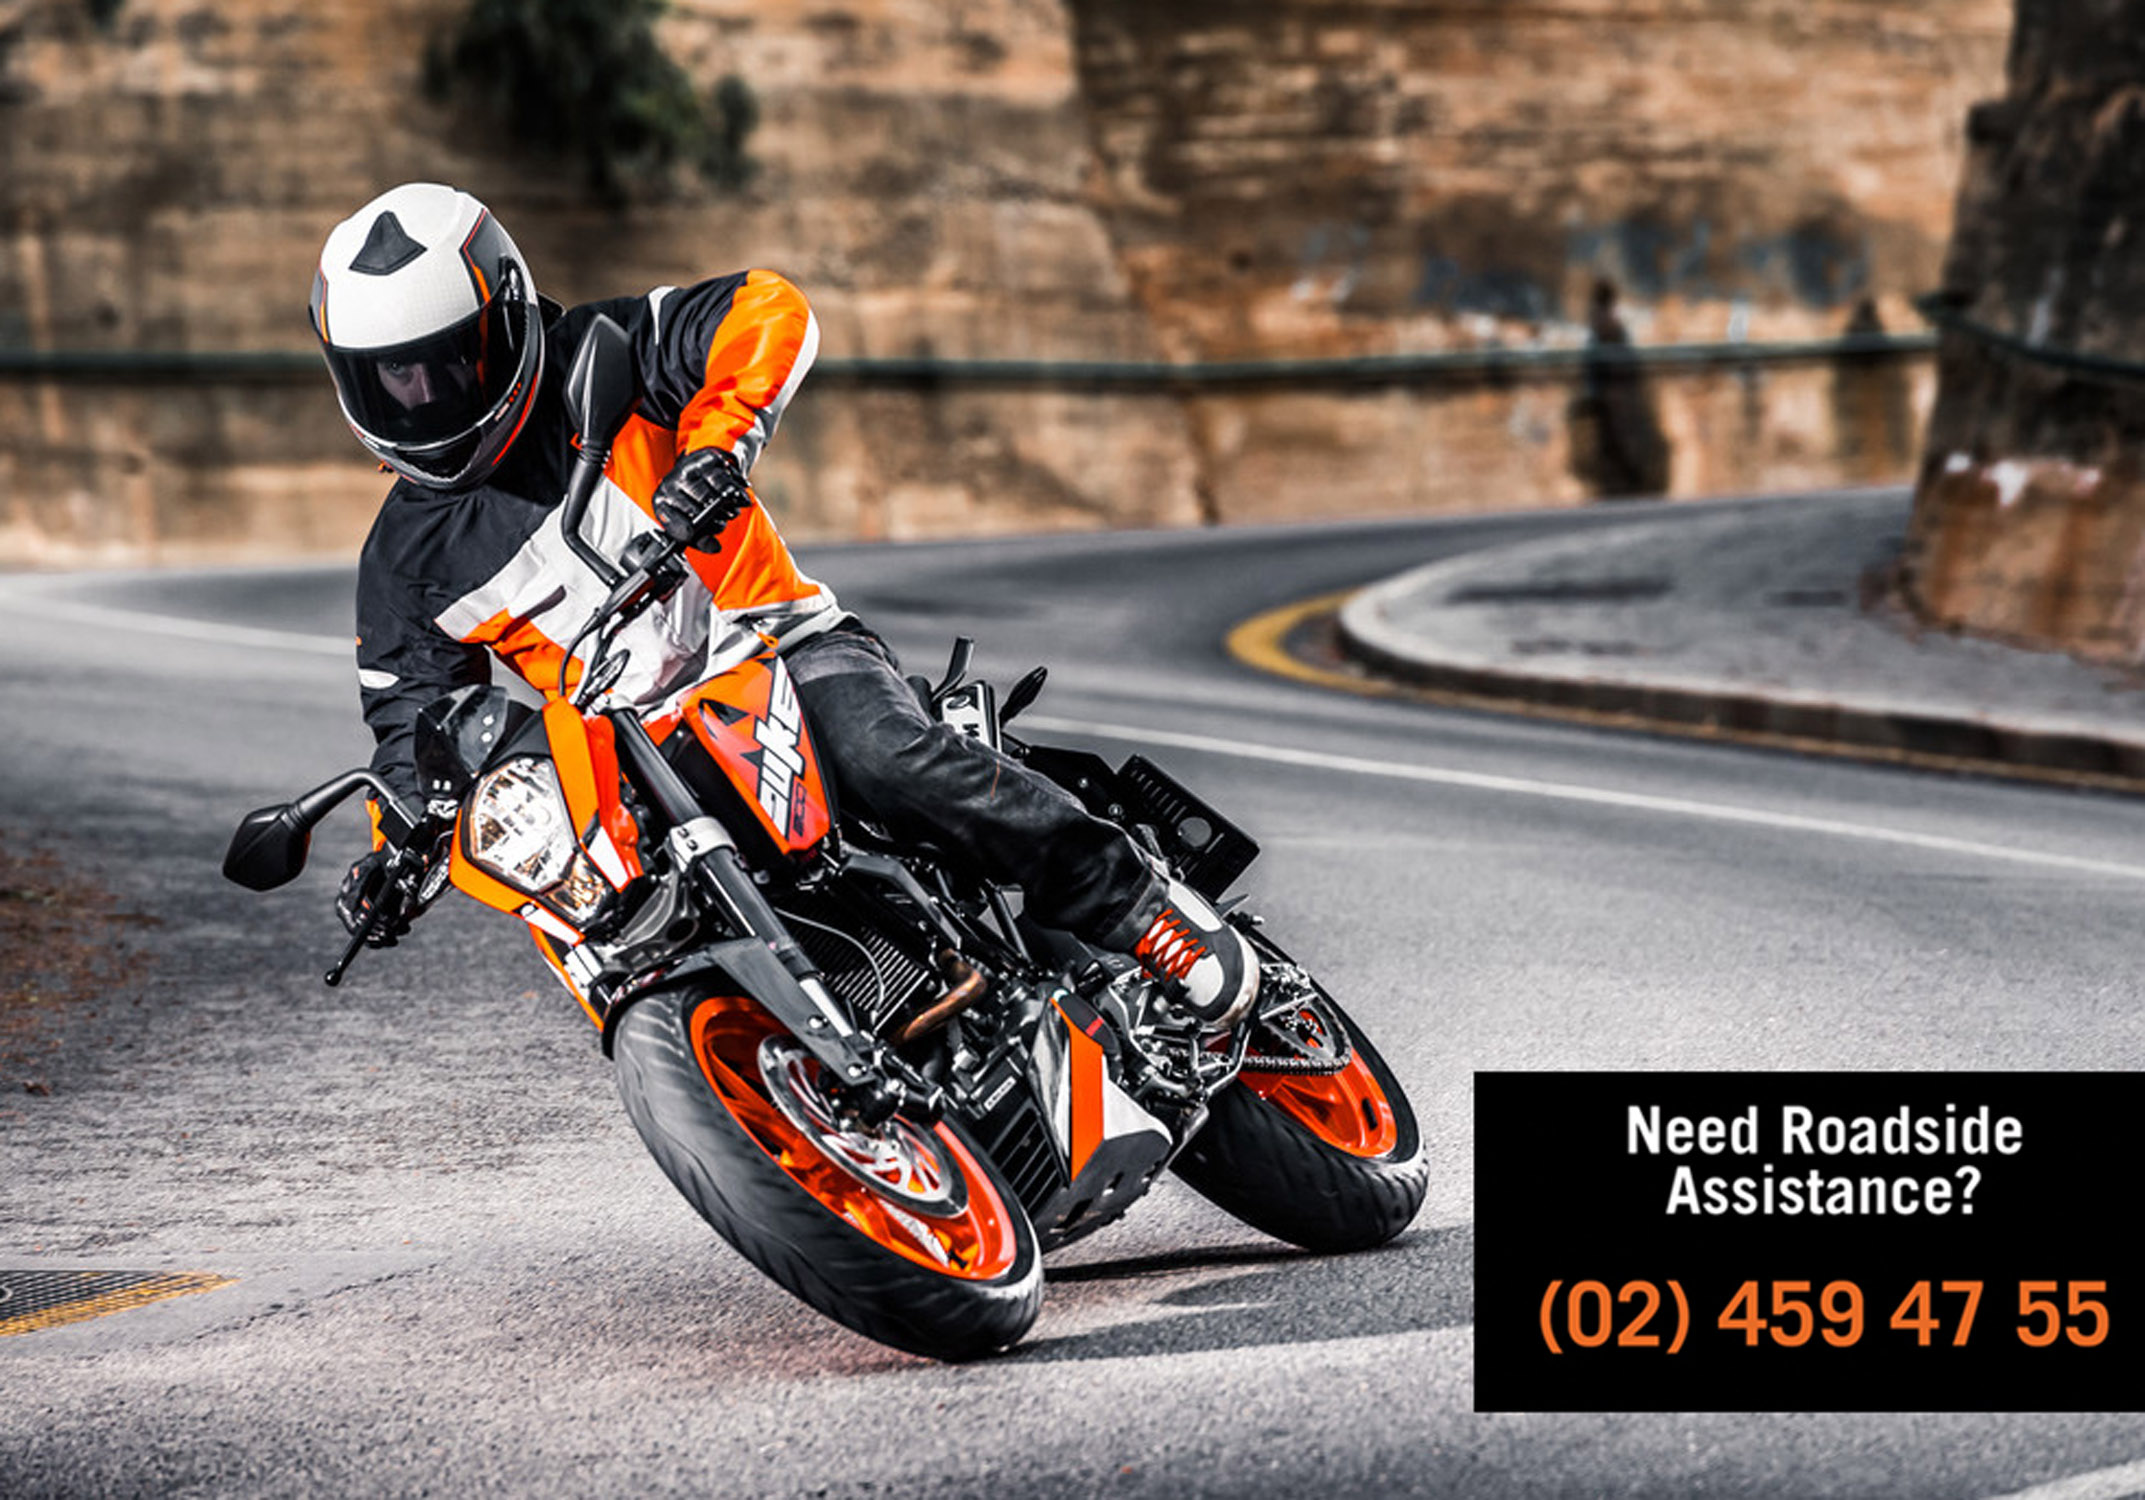 KTM Riders can now avail 24/7 Emergency Roadside Assistance